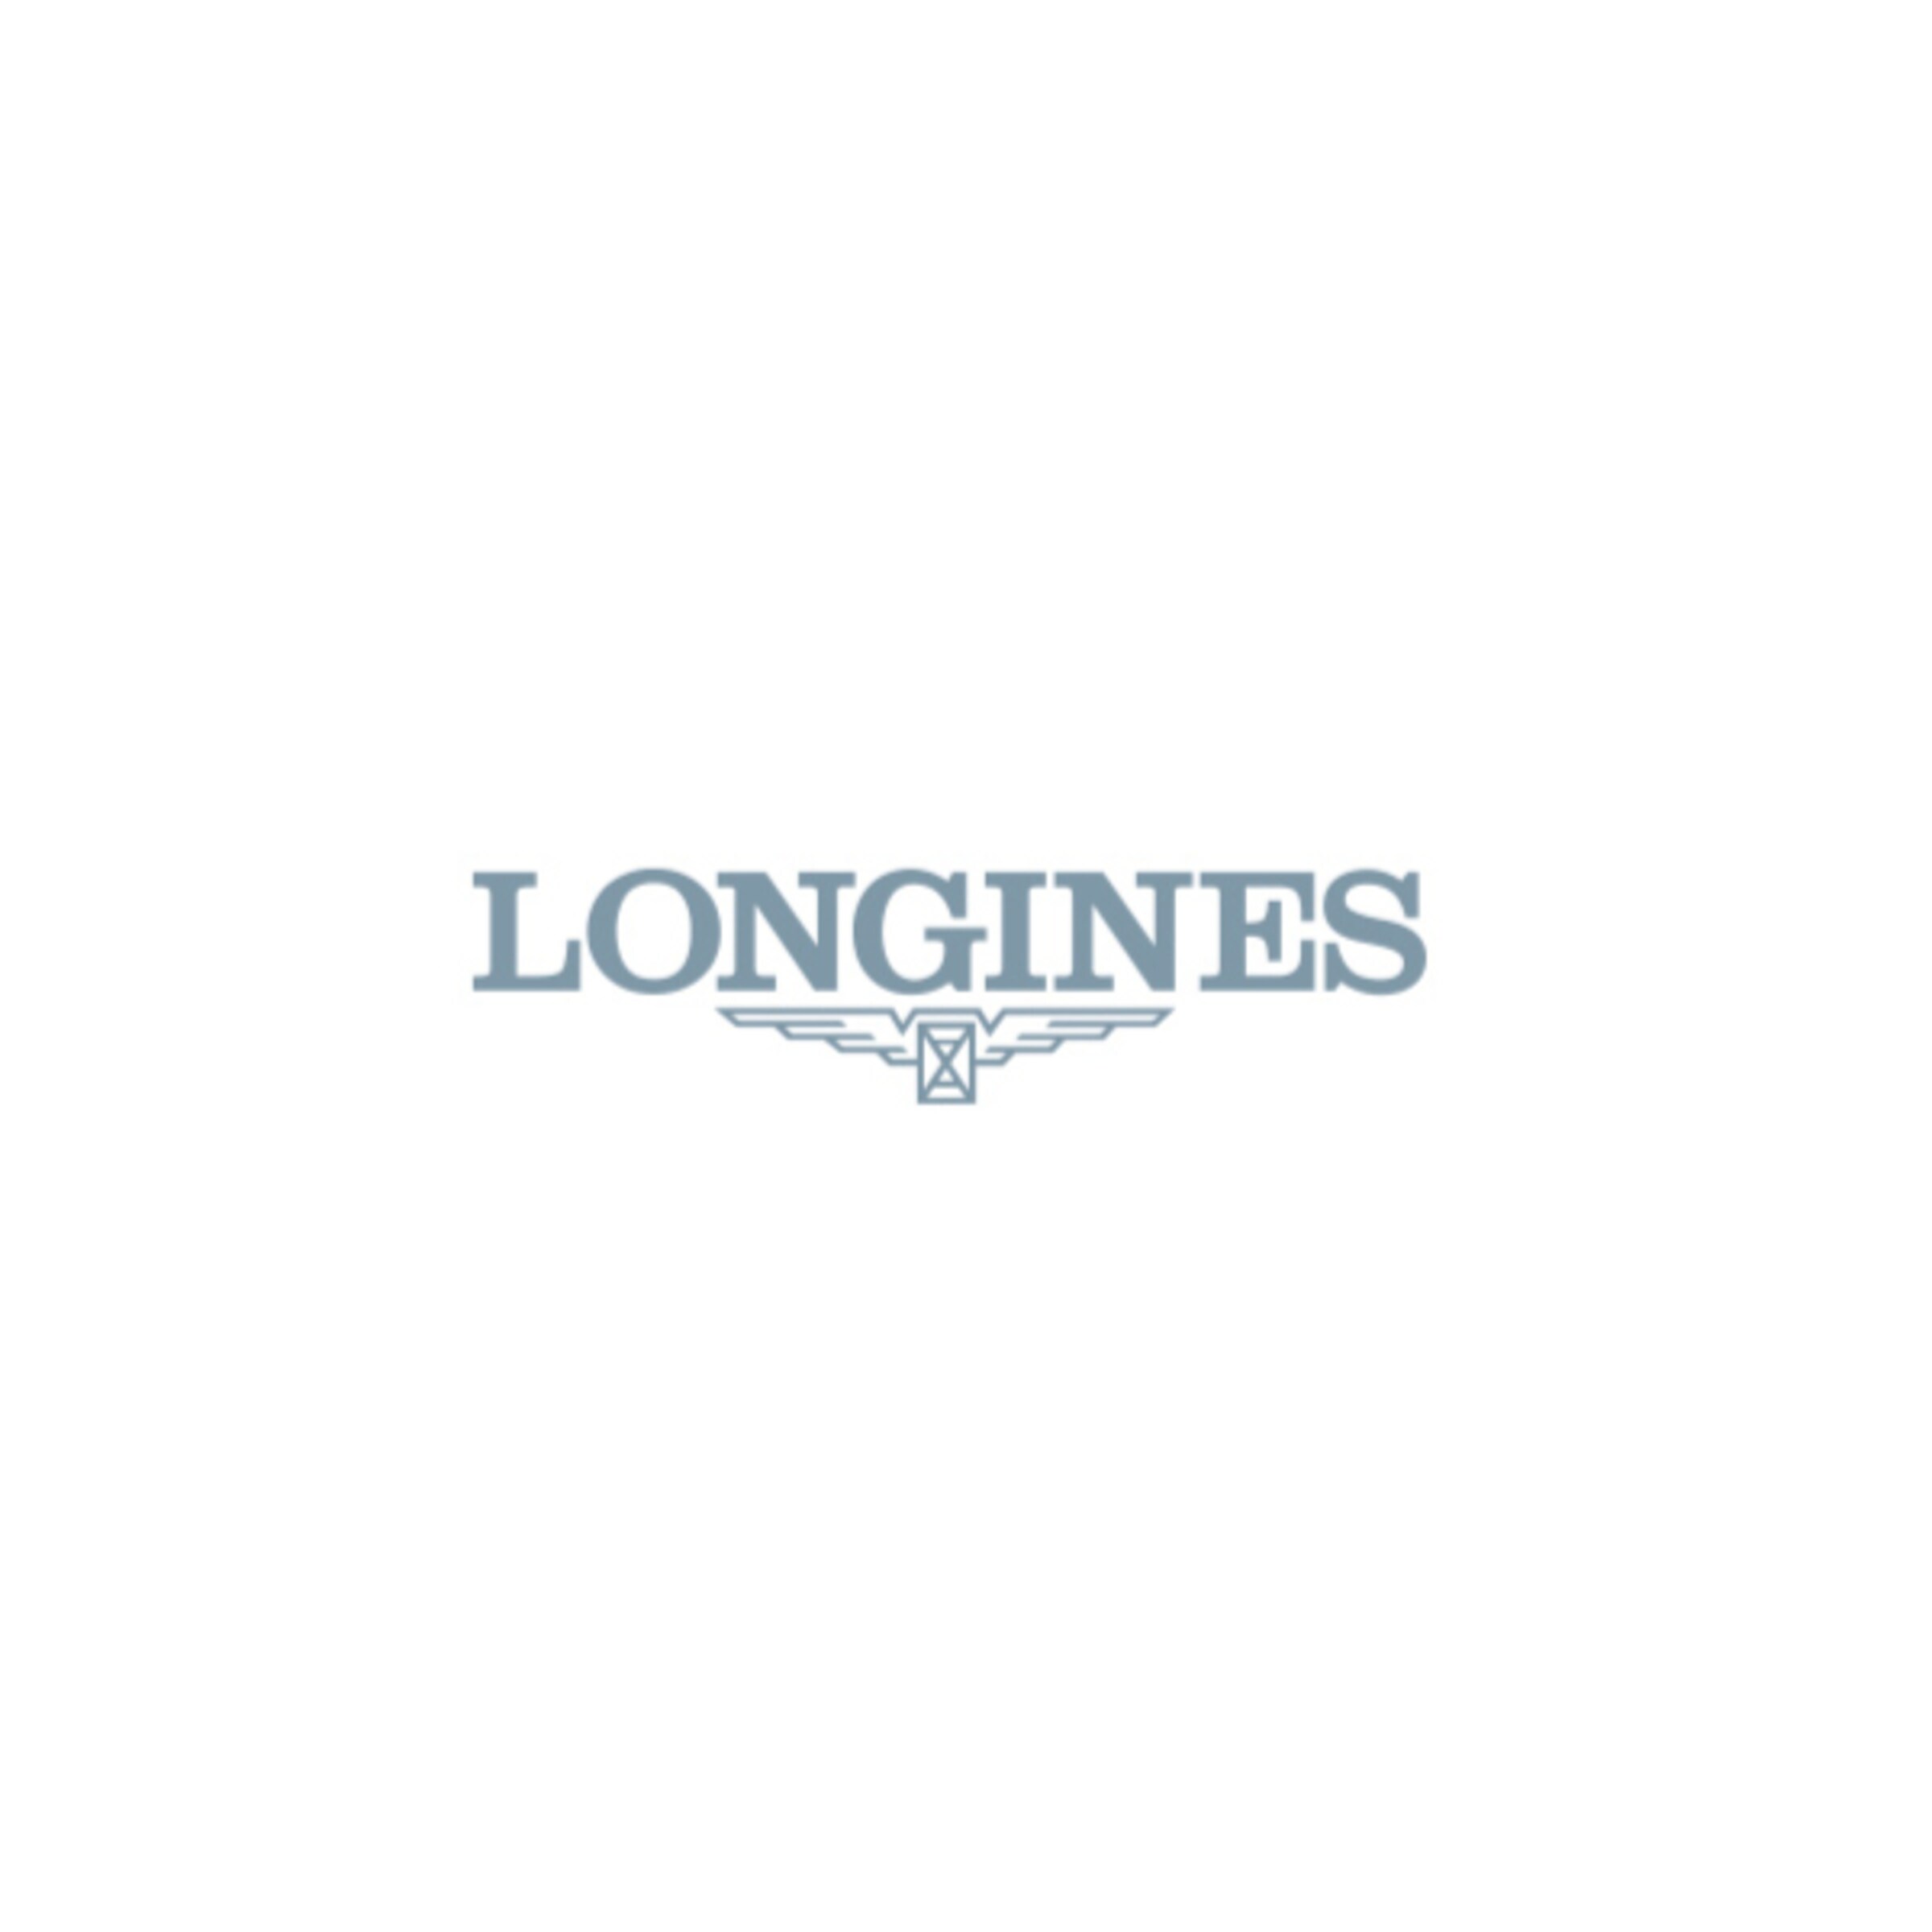 Longines THE LONGINES LEGEND DIVER WATCH Automatic Black PVD coating Watch - L3.774.2.50.9